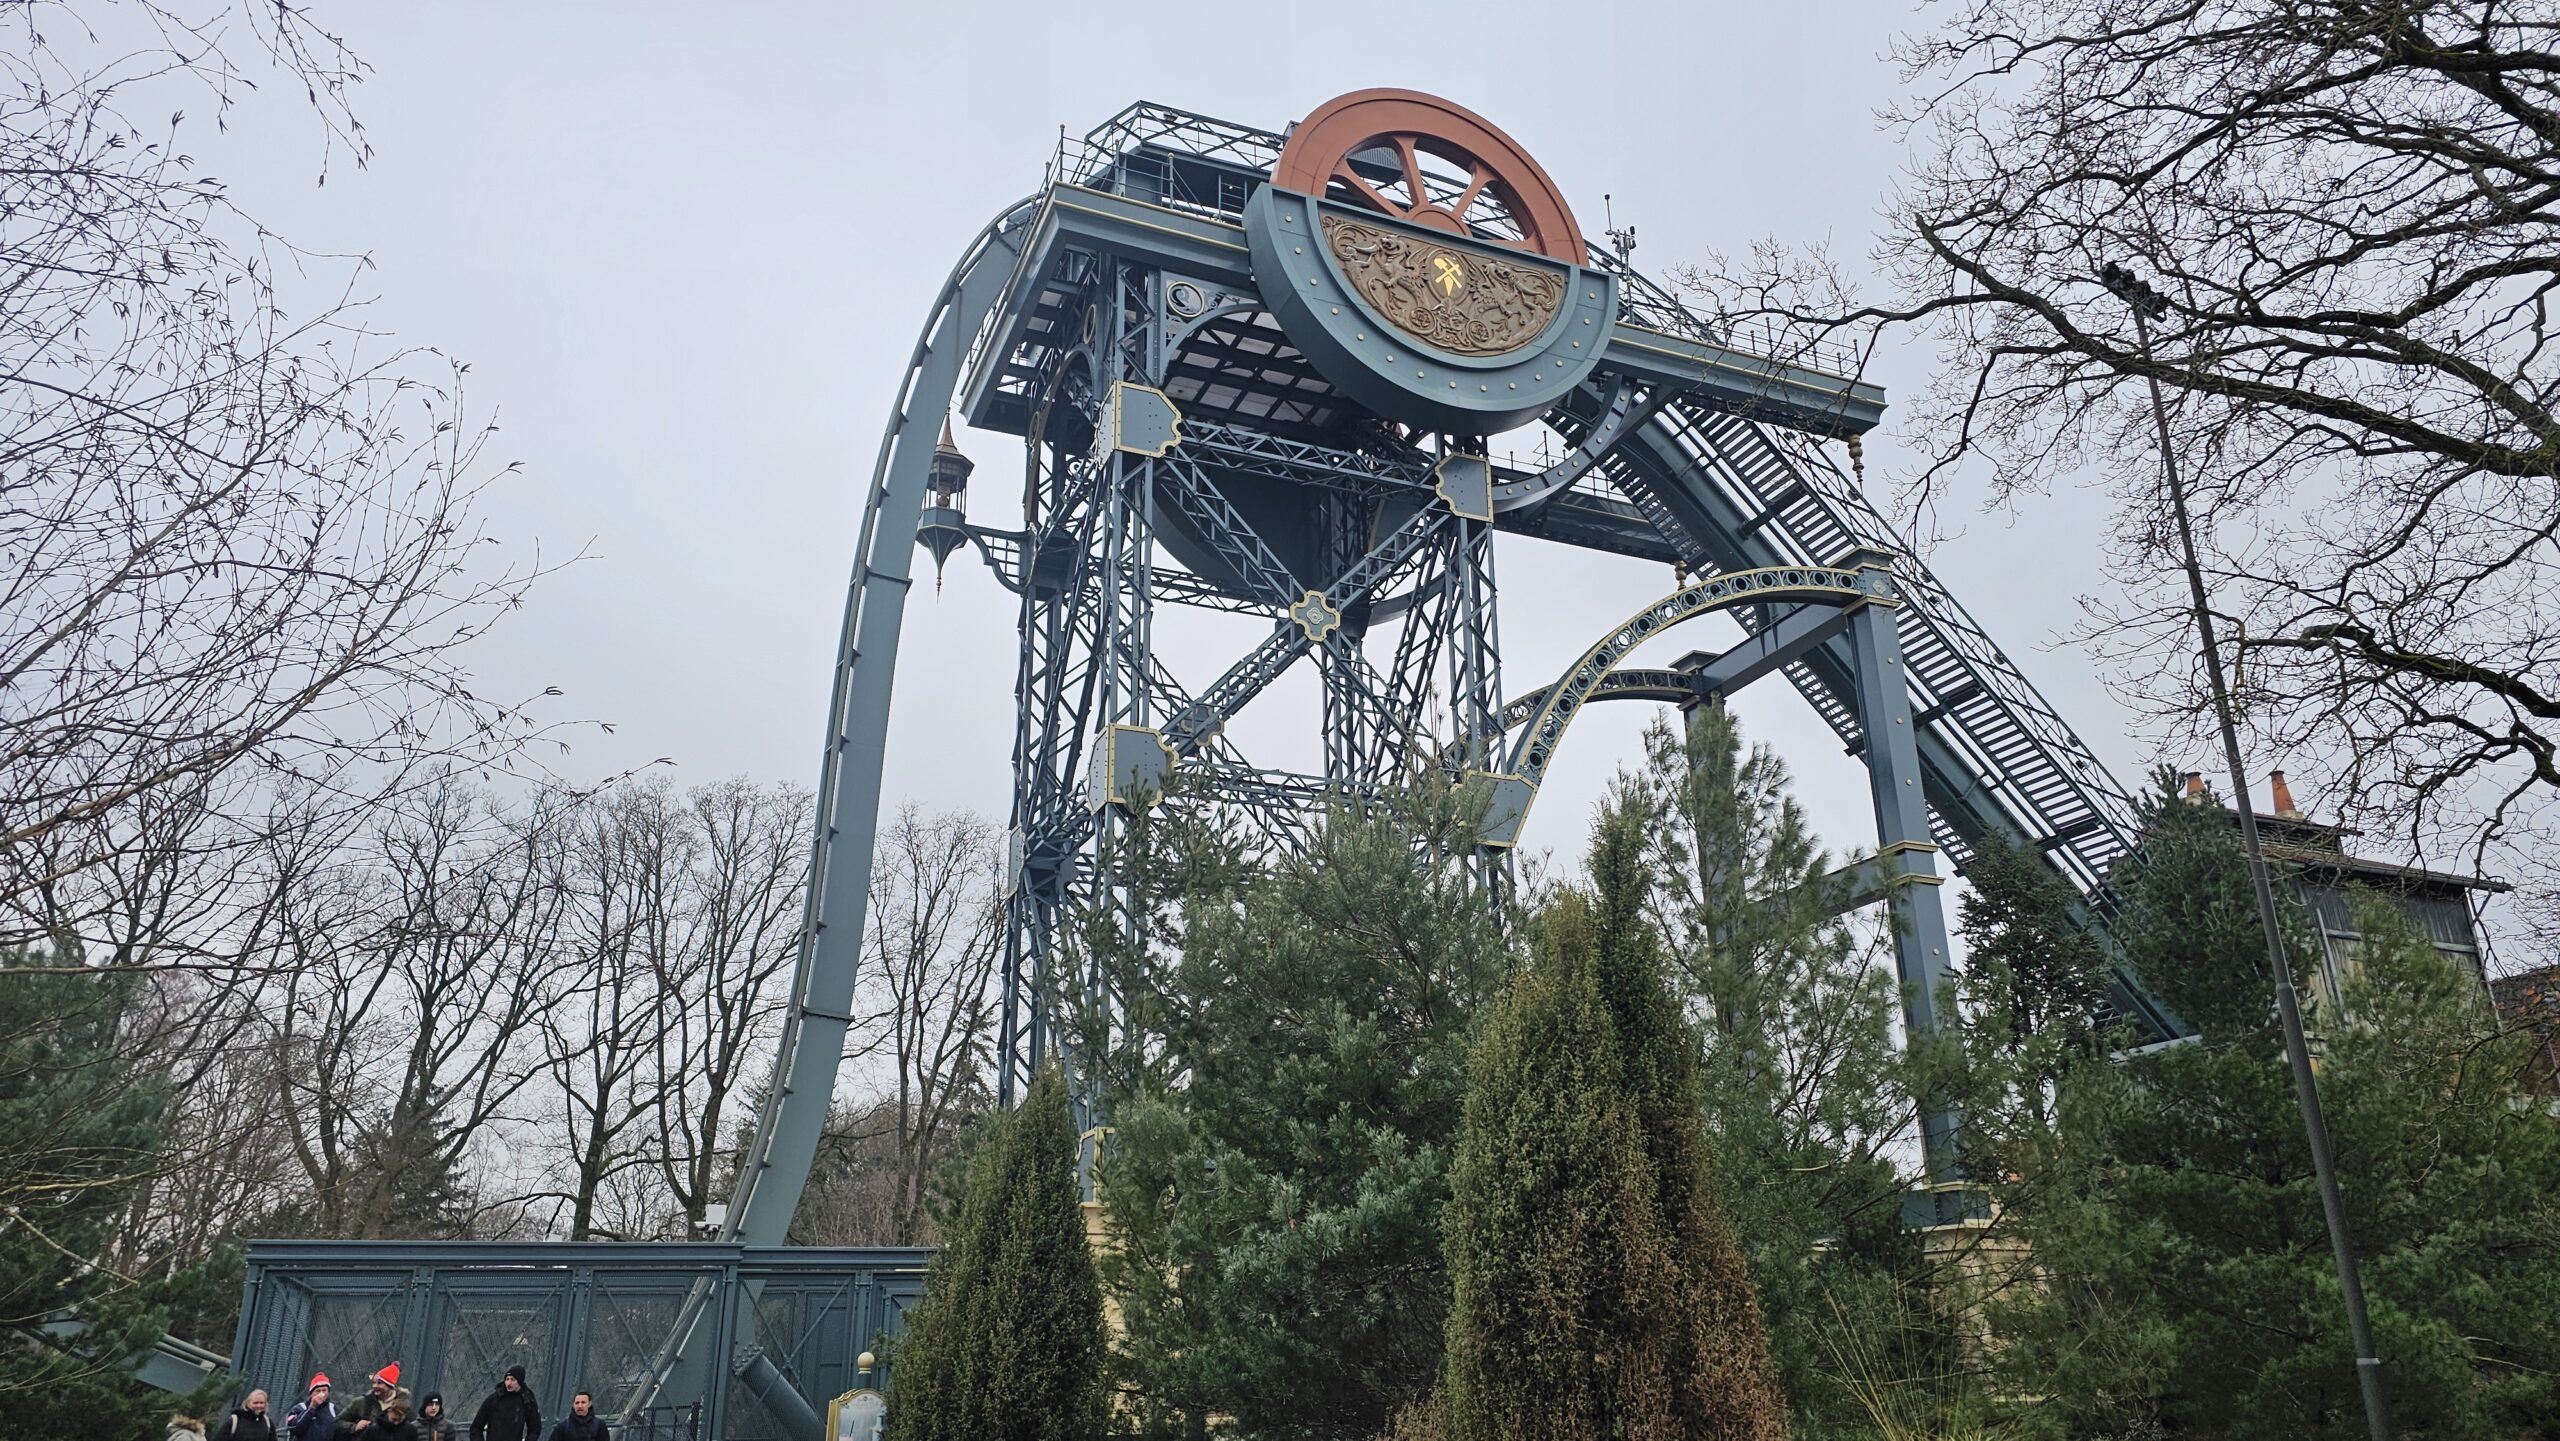 Baron 1898 Roller Coaster Front Row POV at Efteling